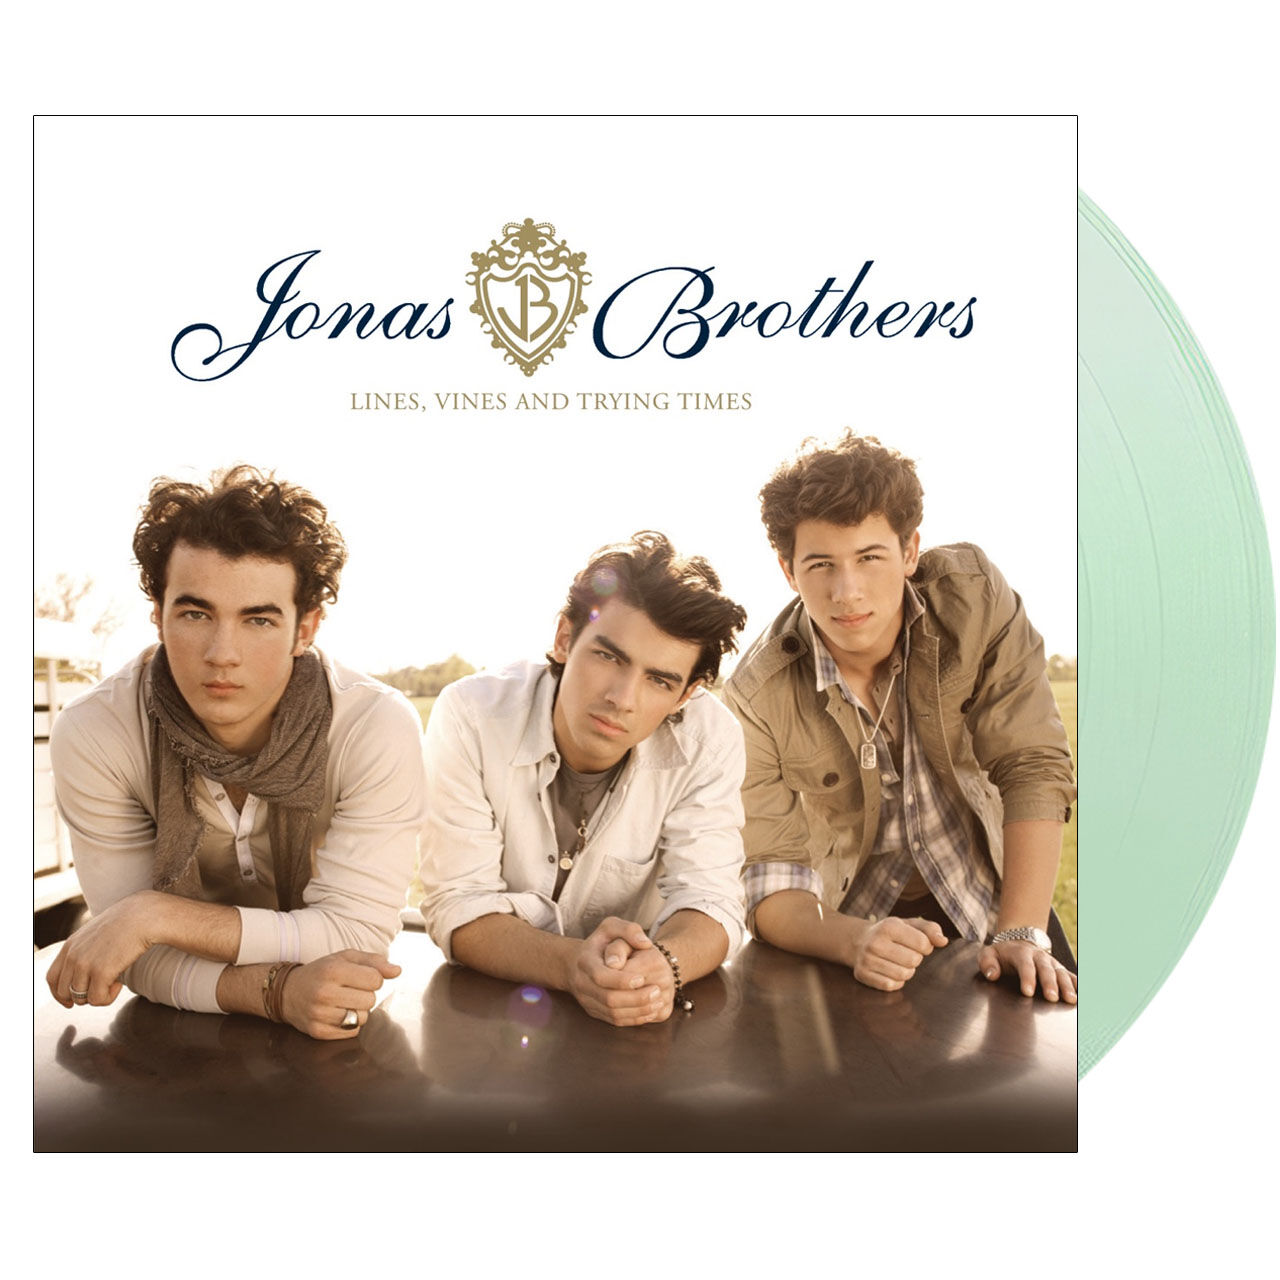 JONAS BROTHERS Lines, Vines and Trying Times Coke Bottle 1LP Vinyl